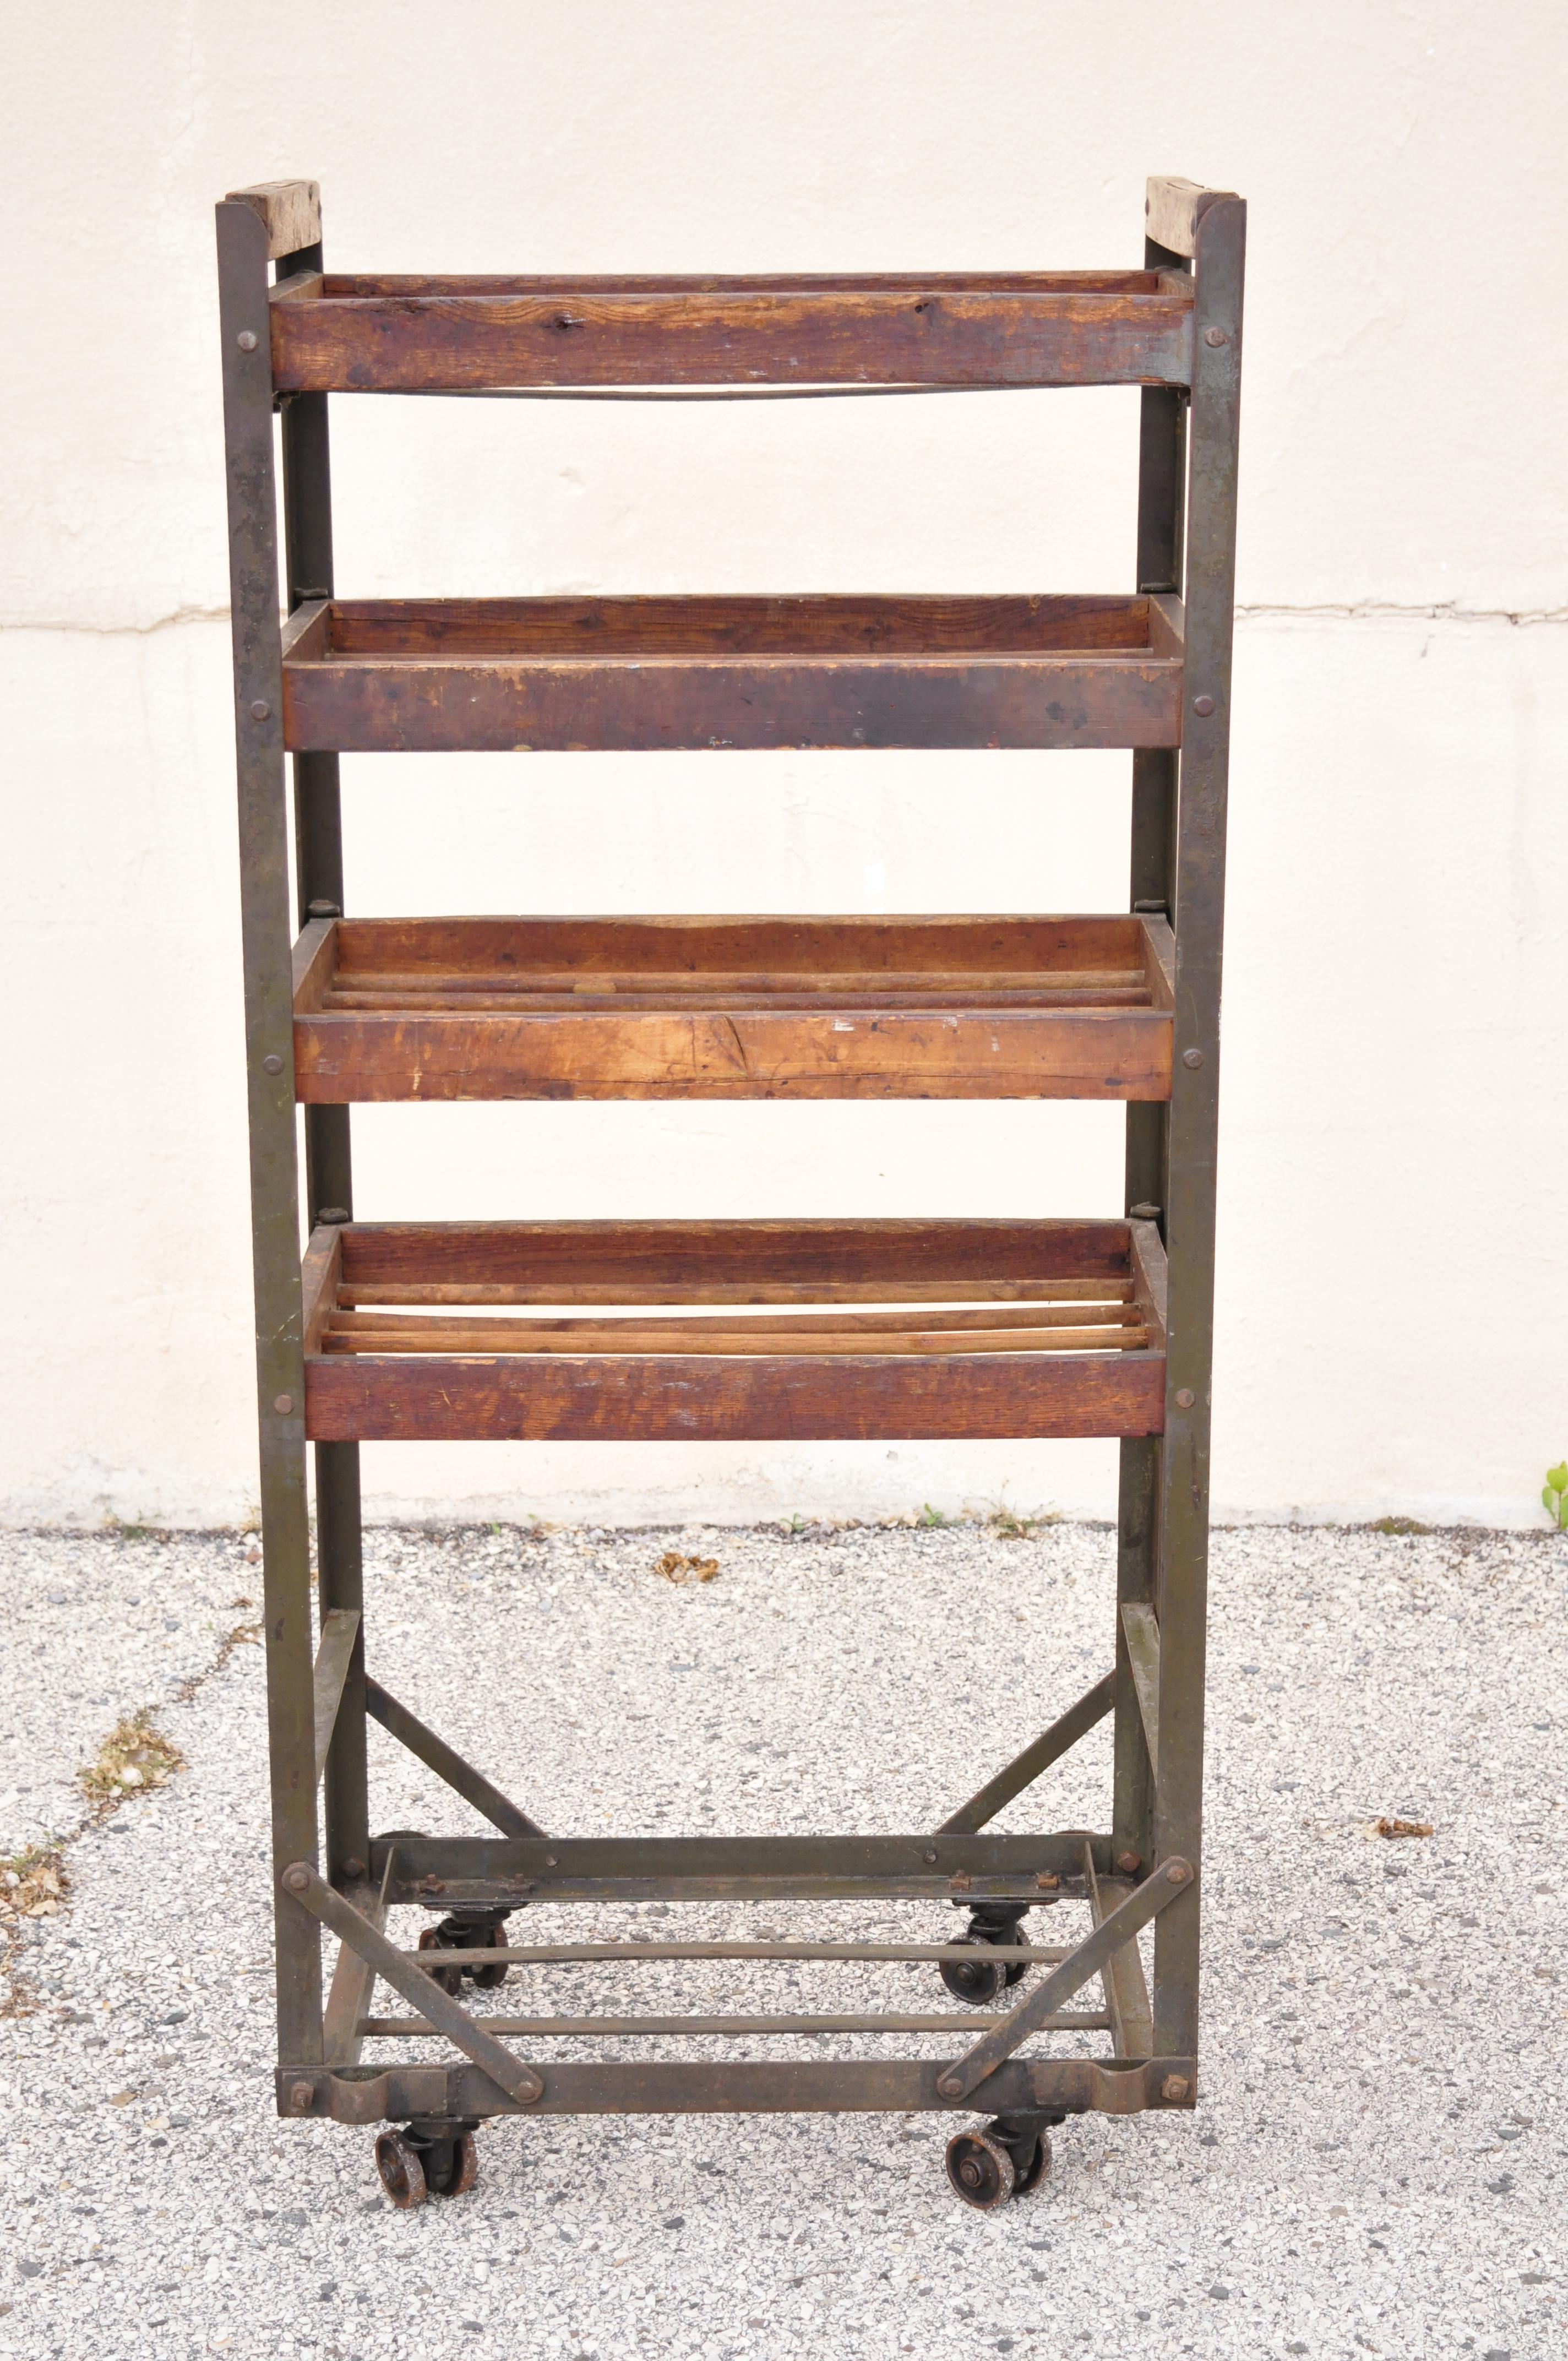 Vintage American industrial steel metal and wood rolling shop work cart stand. Item features wood and iron construction, rolling caster wheels, distressed finish, very nice vintage item, quality craftsmanship. Circa early to mid 1900s. Measurements: